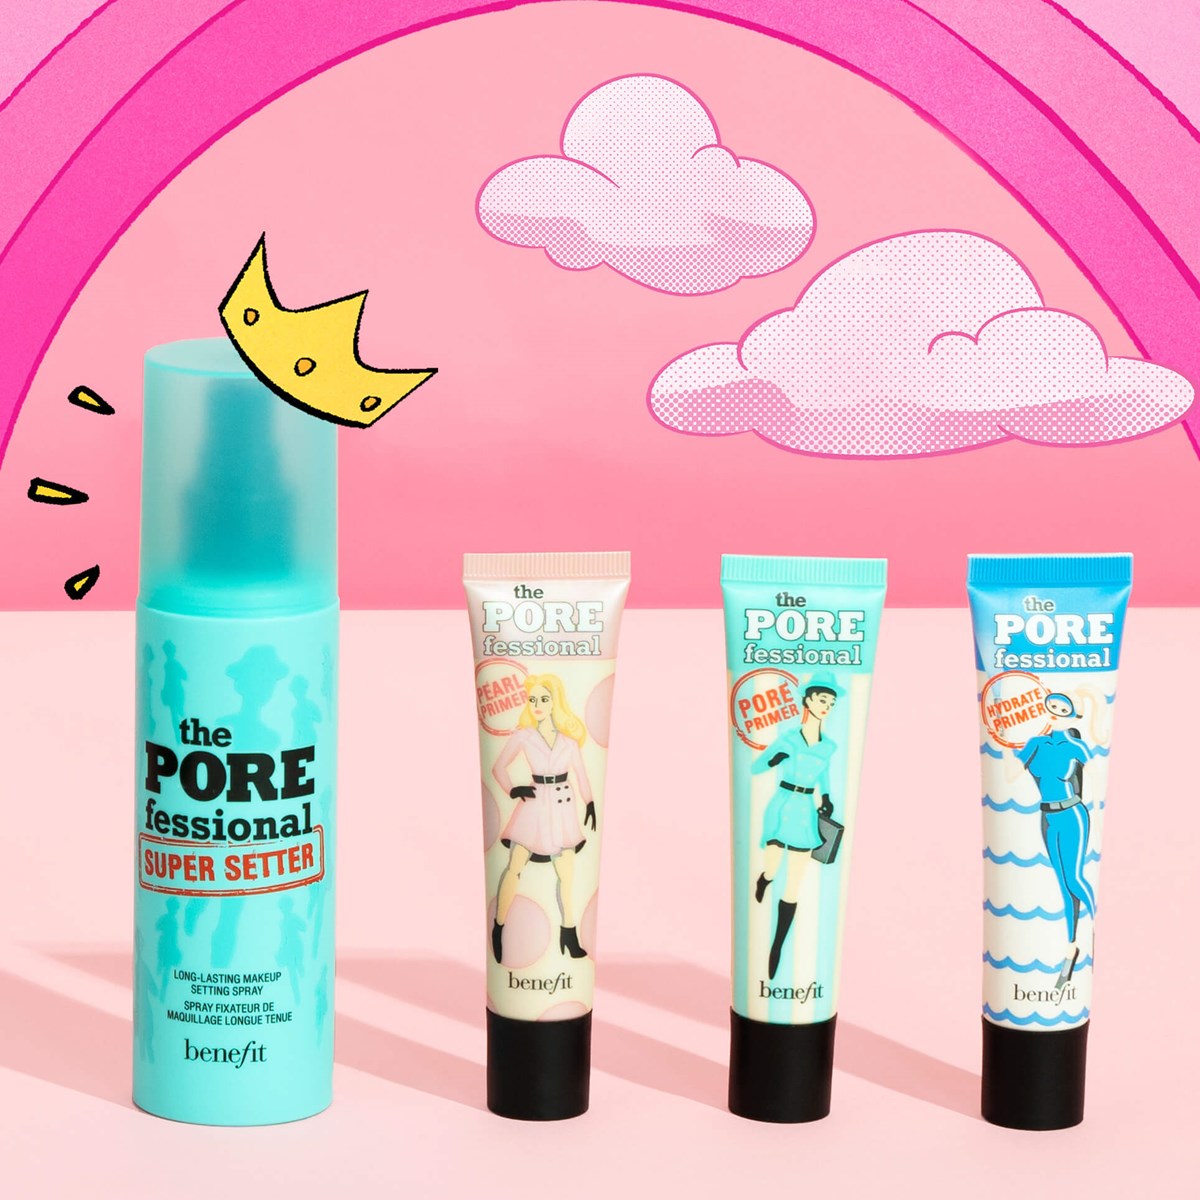 Benefit cosmetics The POREfessional: Super Setter Travel Size Mini 30ml  Long-lasting makeup setting spray without box